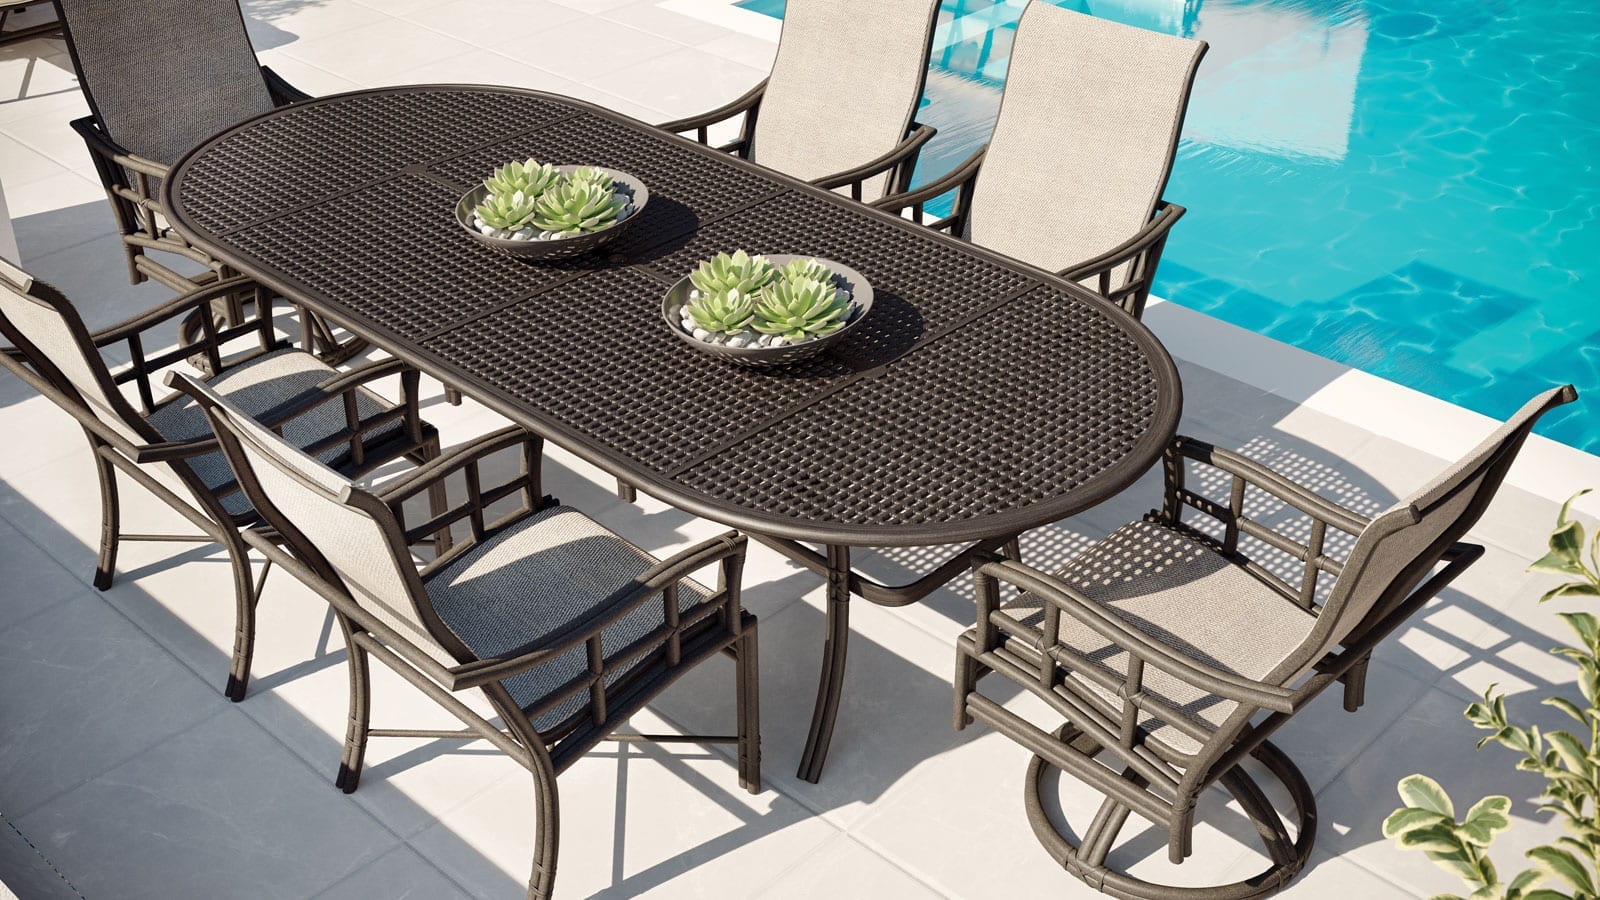 Resort Fusion Sling outdoor furniture dining table set from Castelle on a patio next to a pool